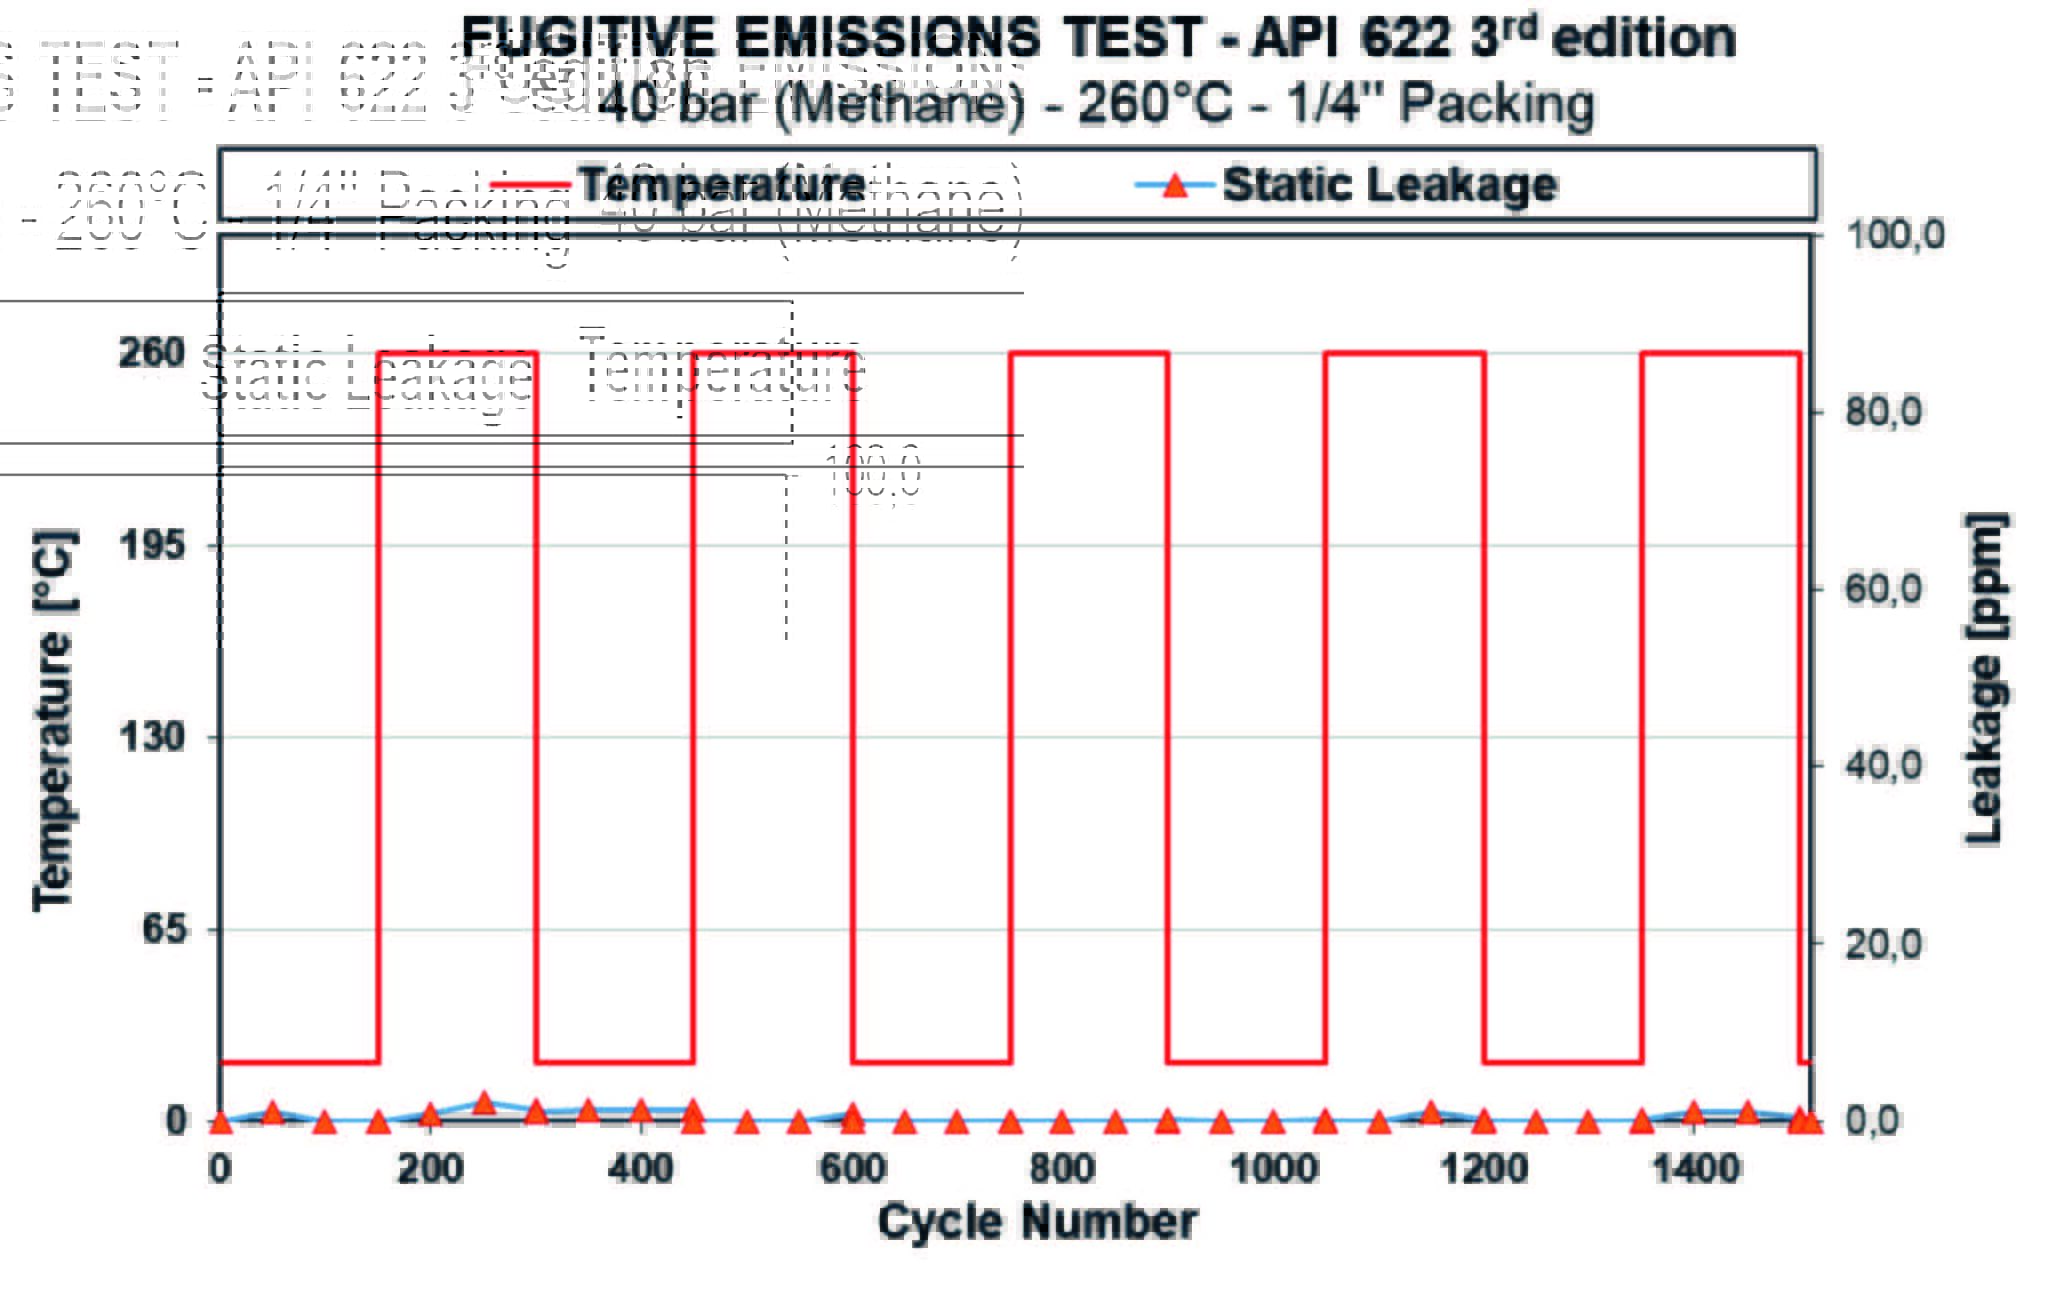 Figure 3: Fugitive emission test results according to API 622 3rd Edition.